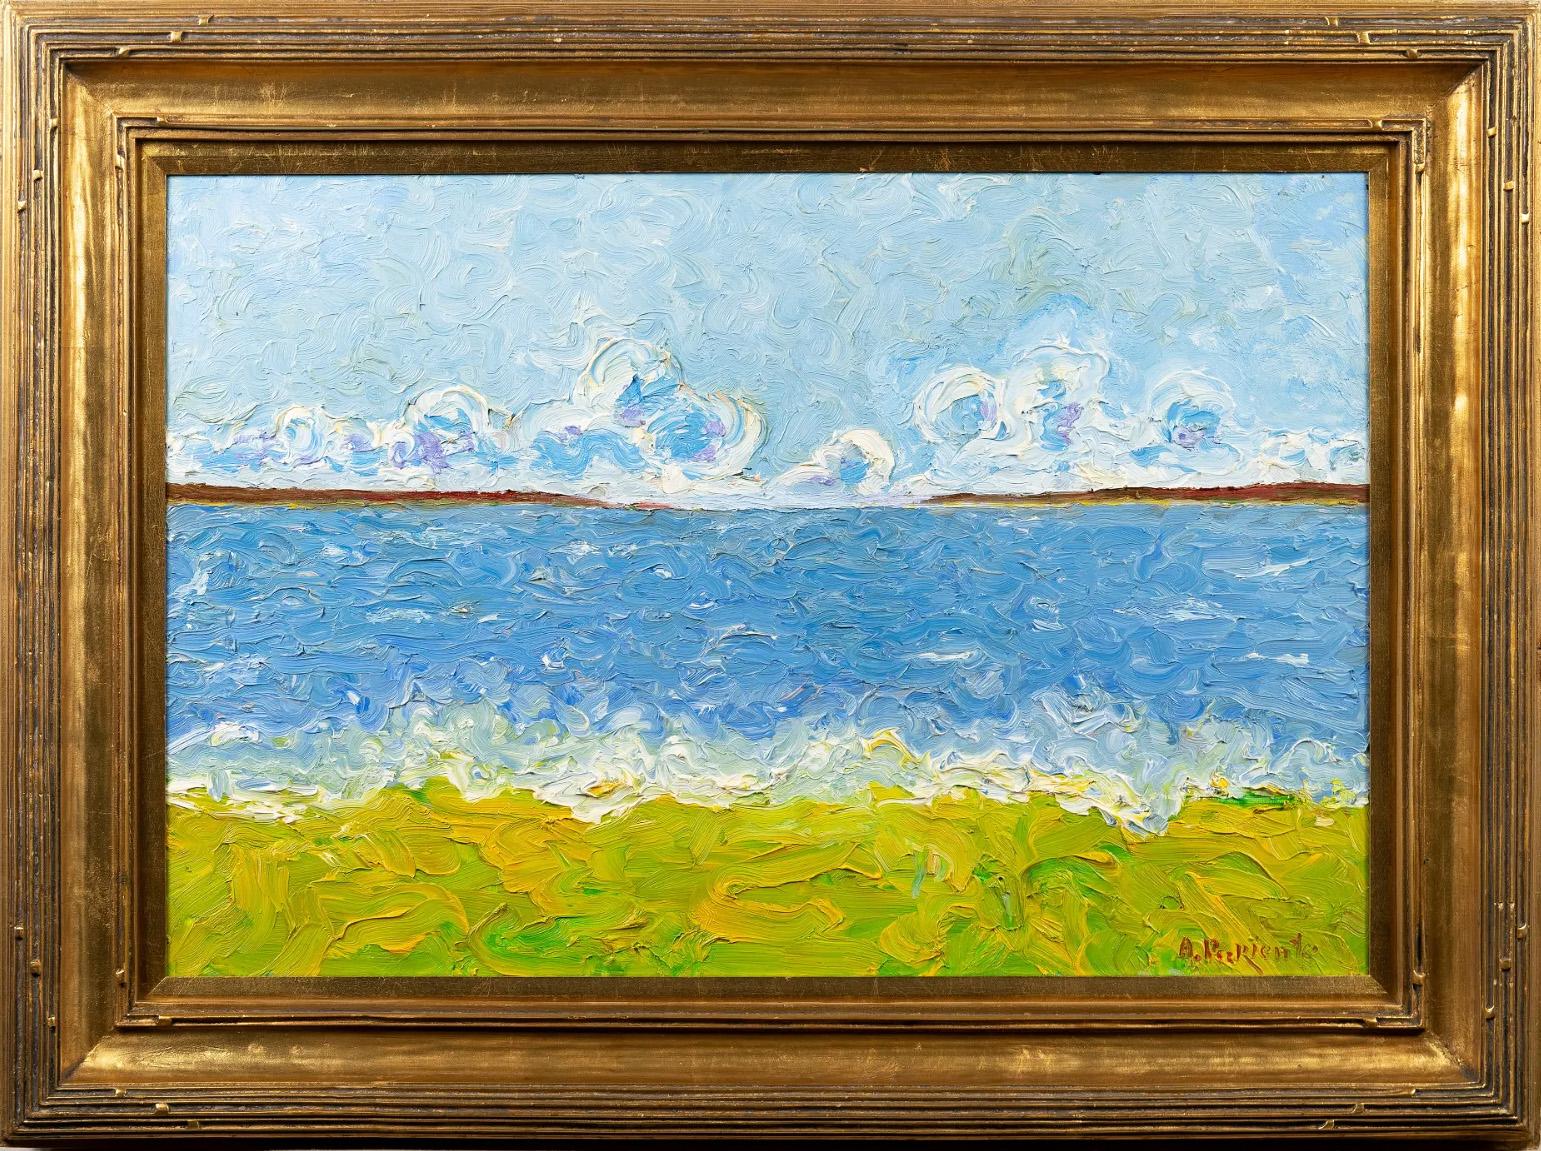 Modernist abstract landscape painting by Abraham Pariente.  Oil on canvas, circa 1990.  Signed.  Displayed in a giltwood impressionist frame.  